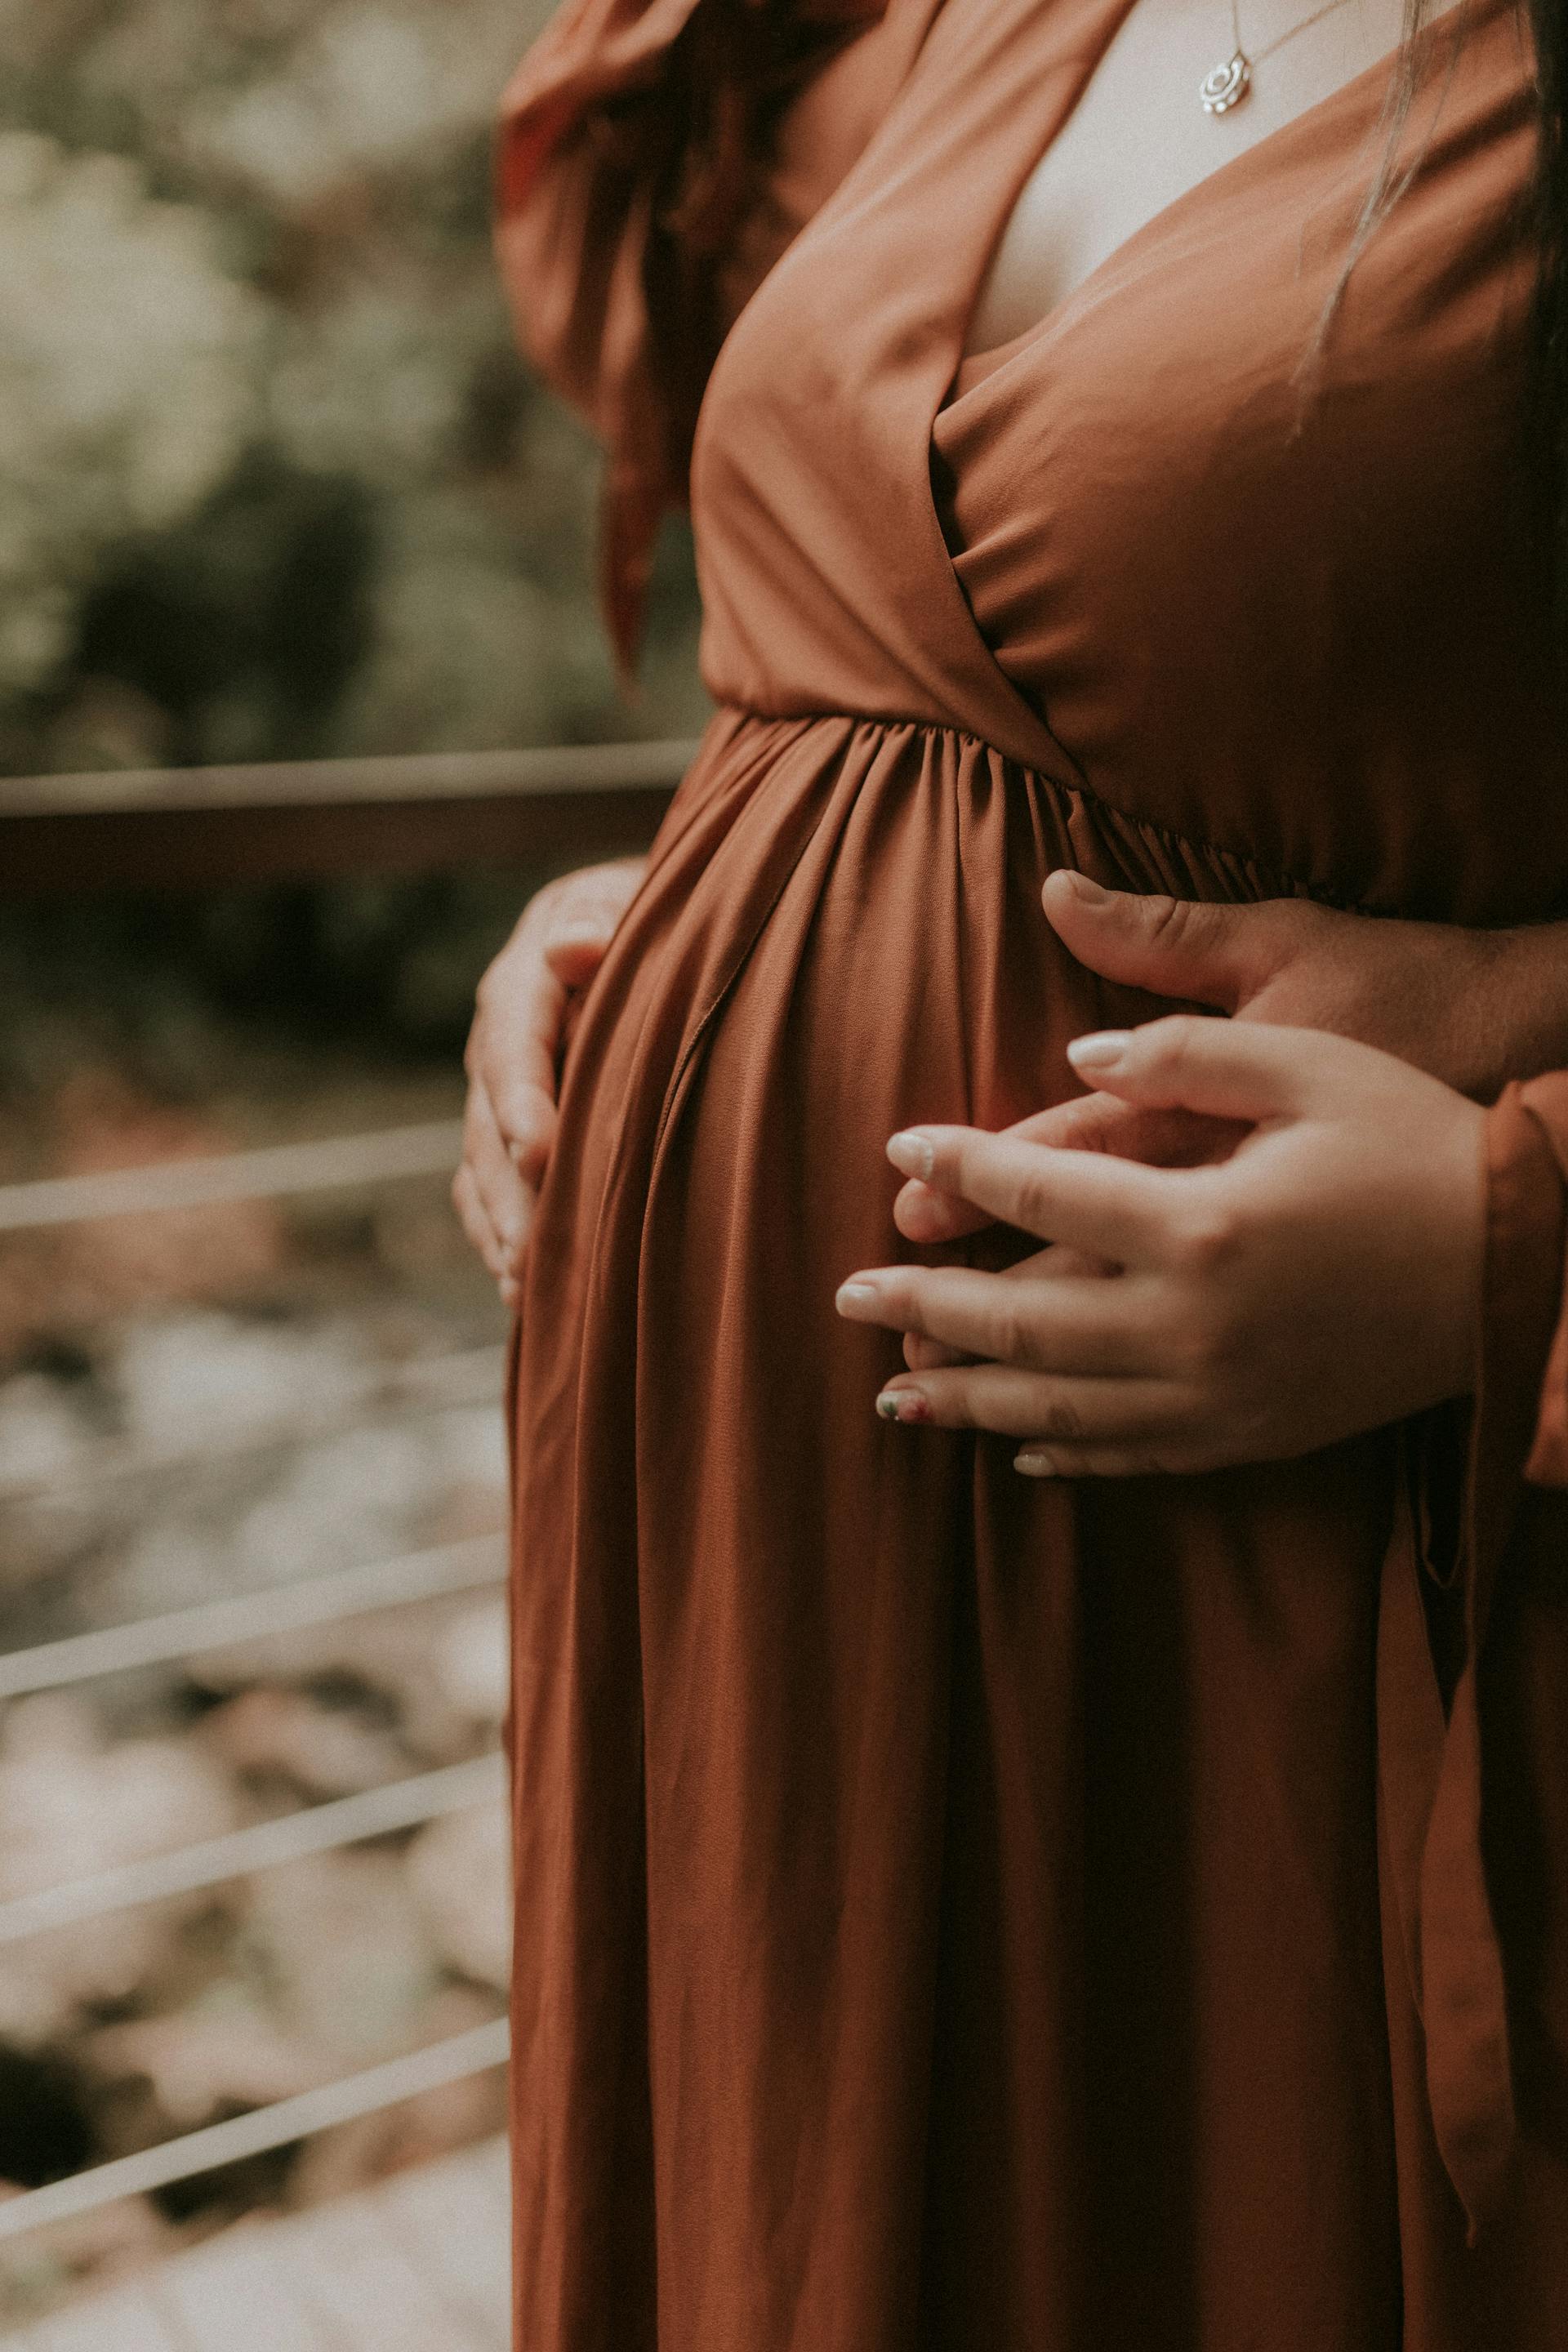 A couple holding hands while touching the pregnant woman's baby bump | Source: Pexels